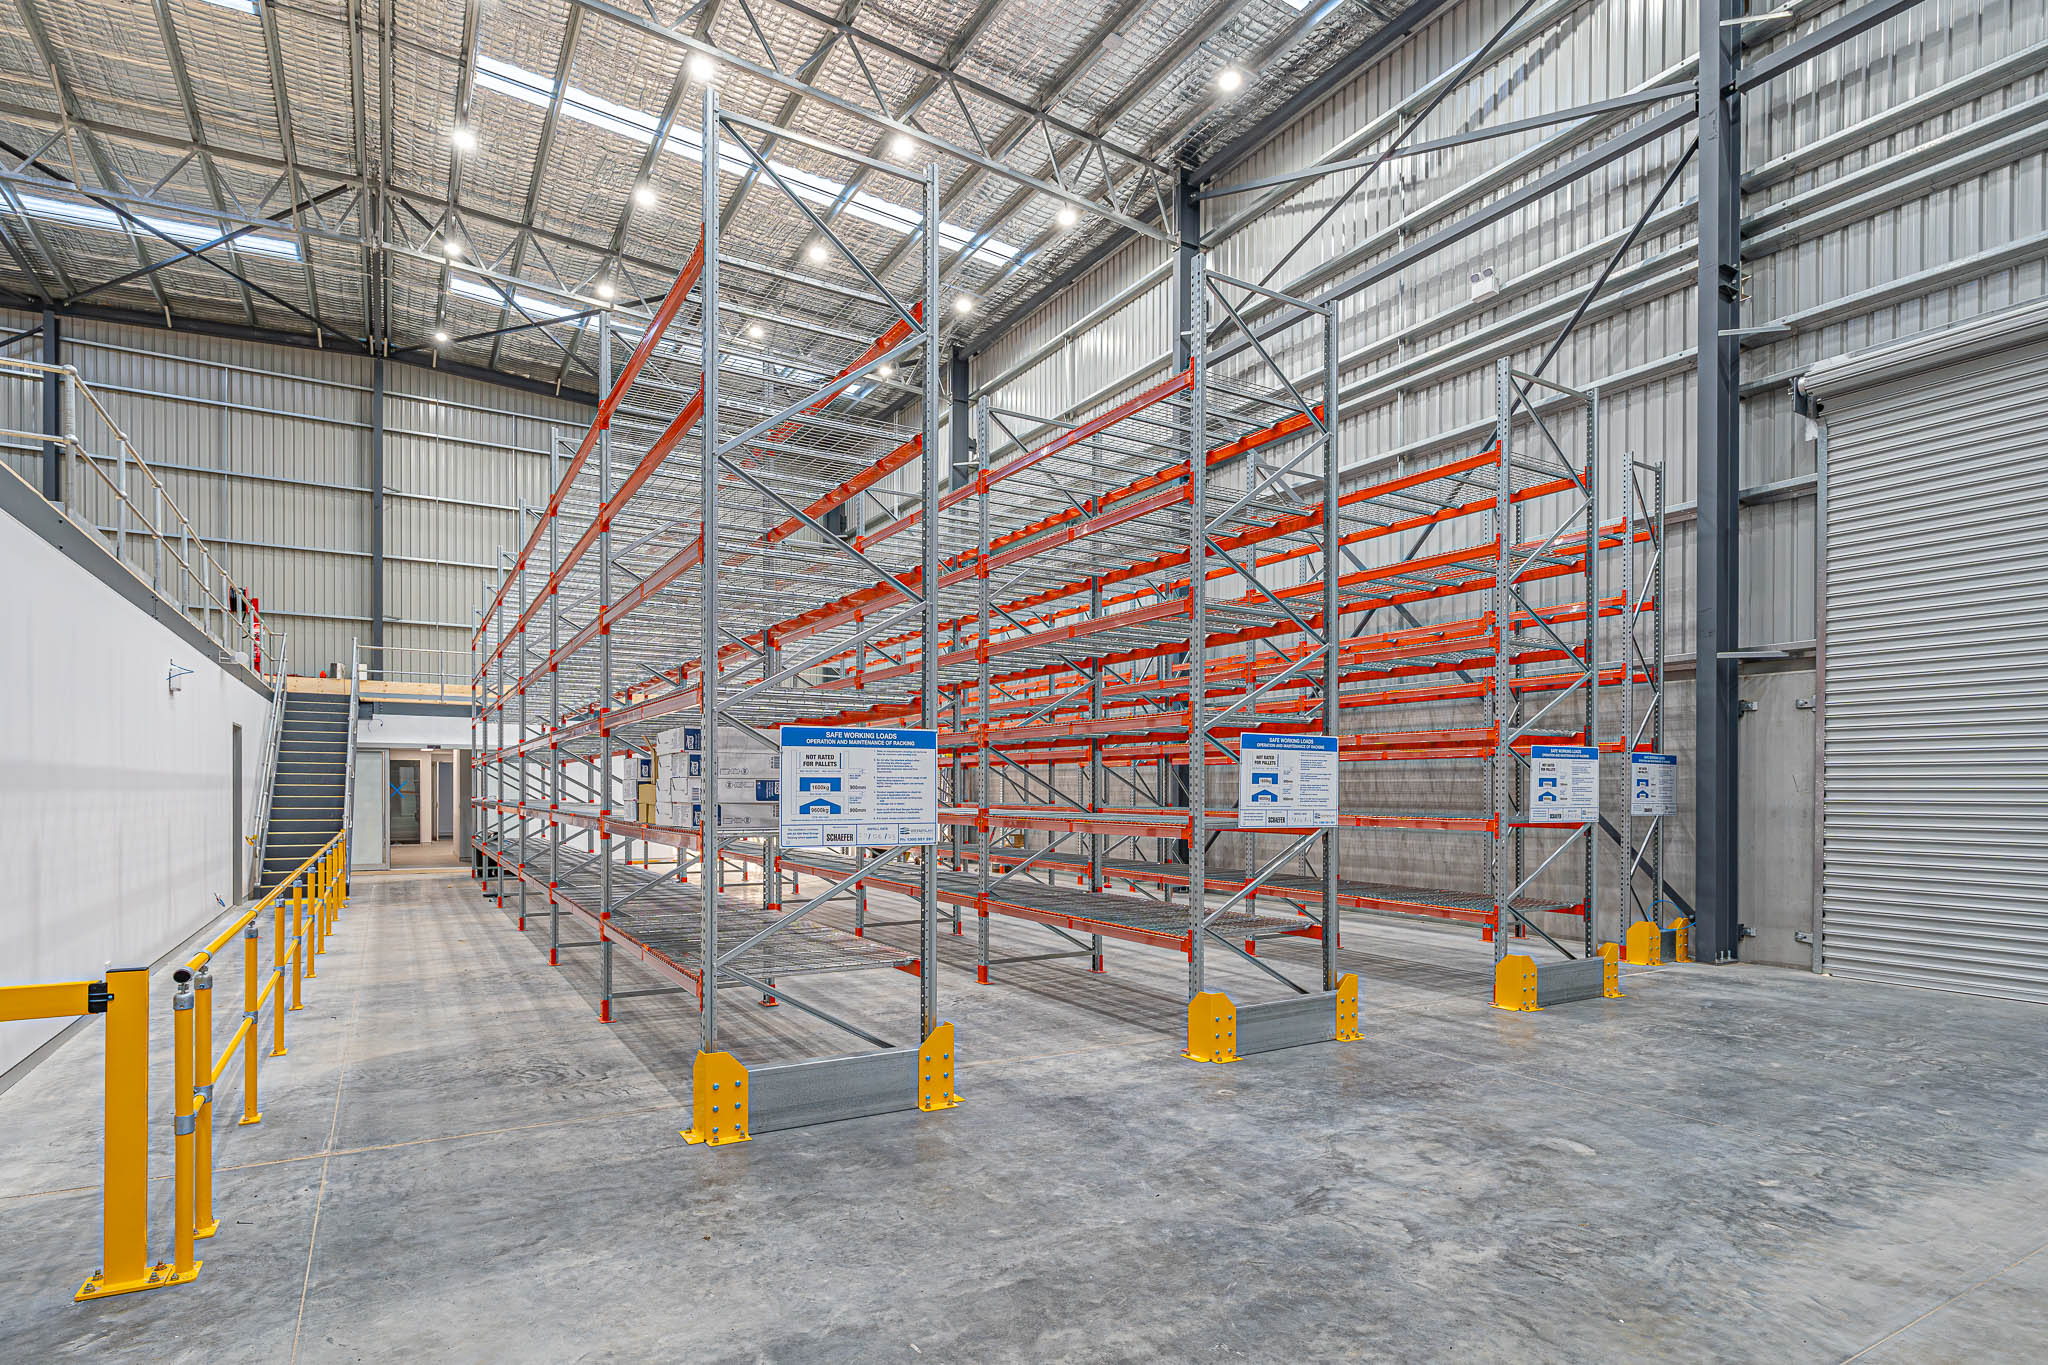 New project for Cummins in Tamworth including pallet racking and hand railings across the walkways